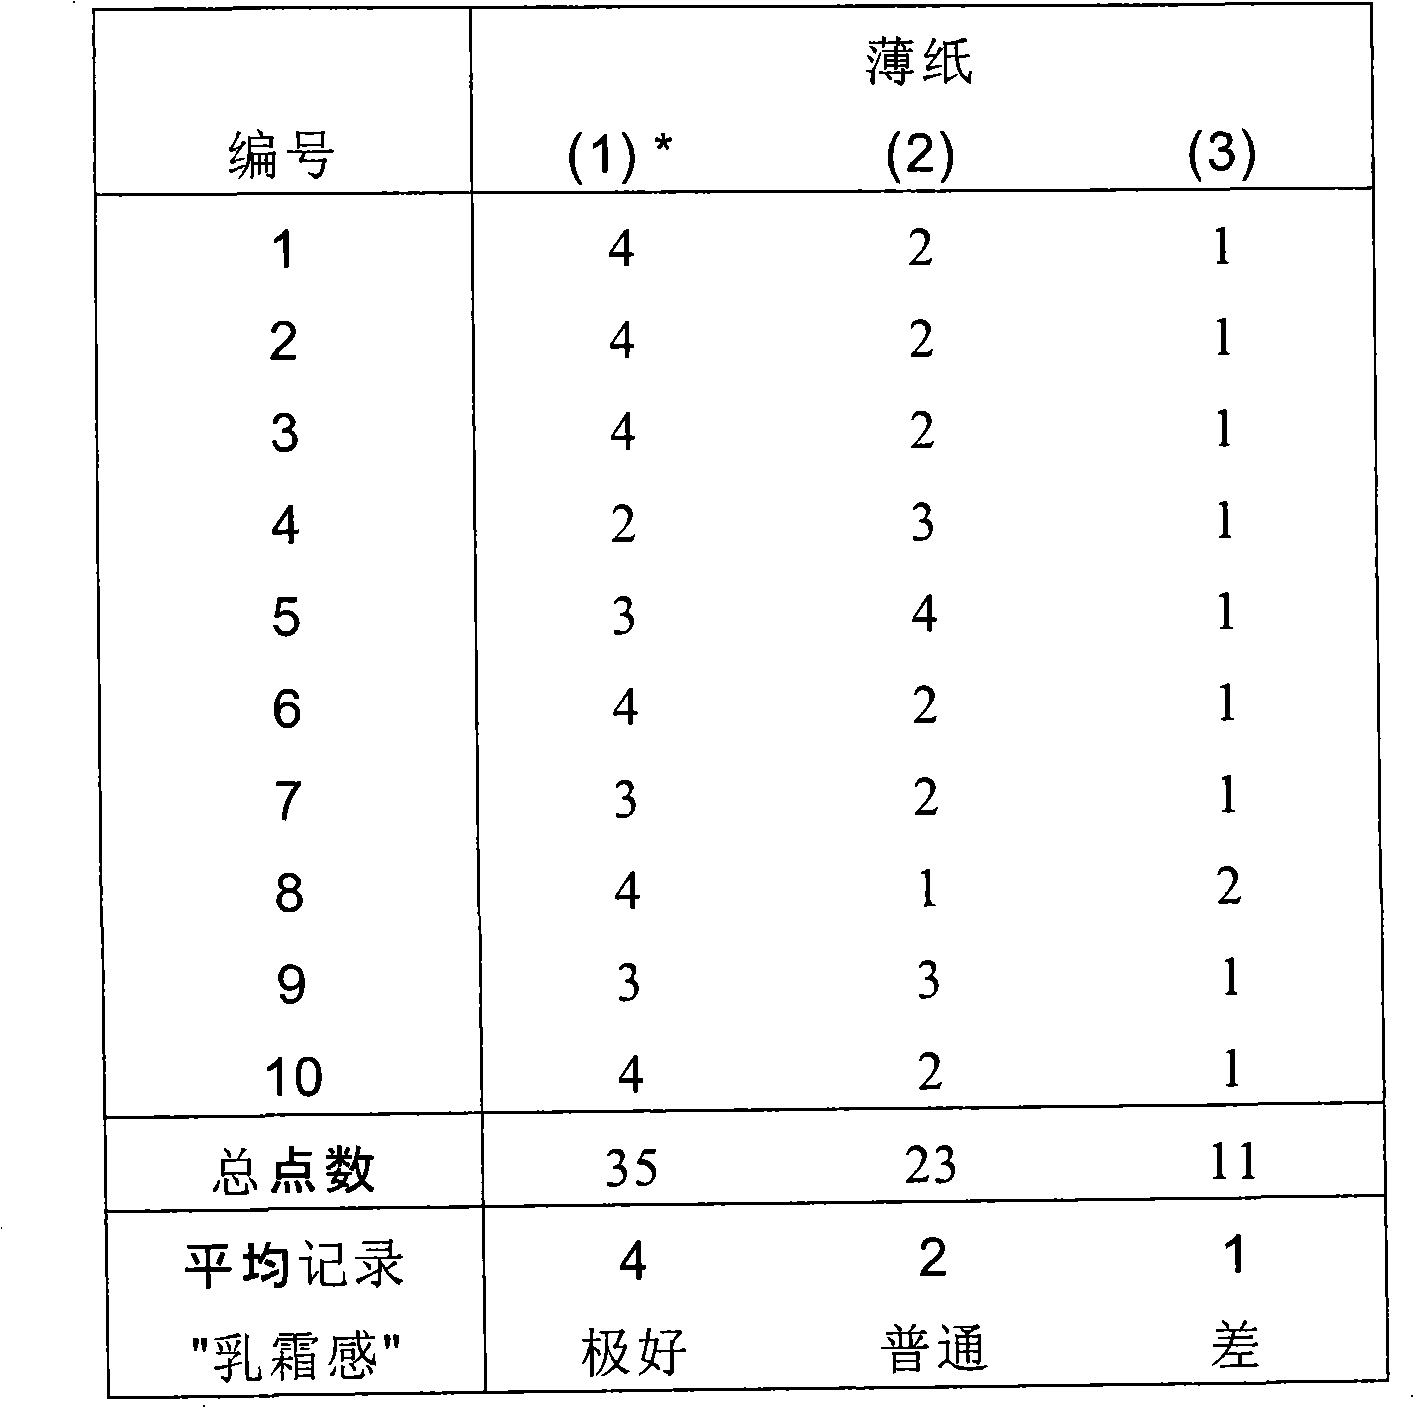 Emulsion composition, method for softening fiber structure and fiber containing base material